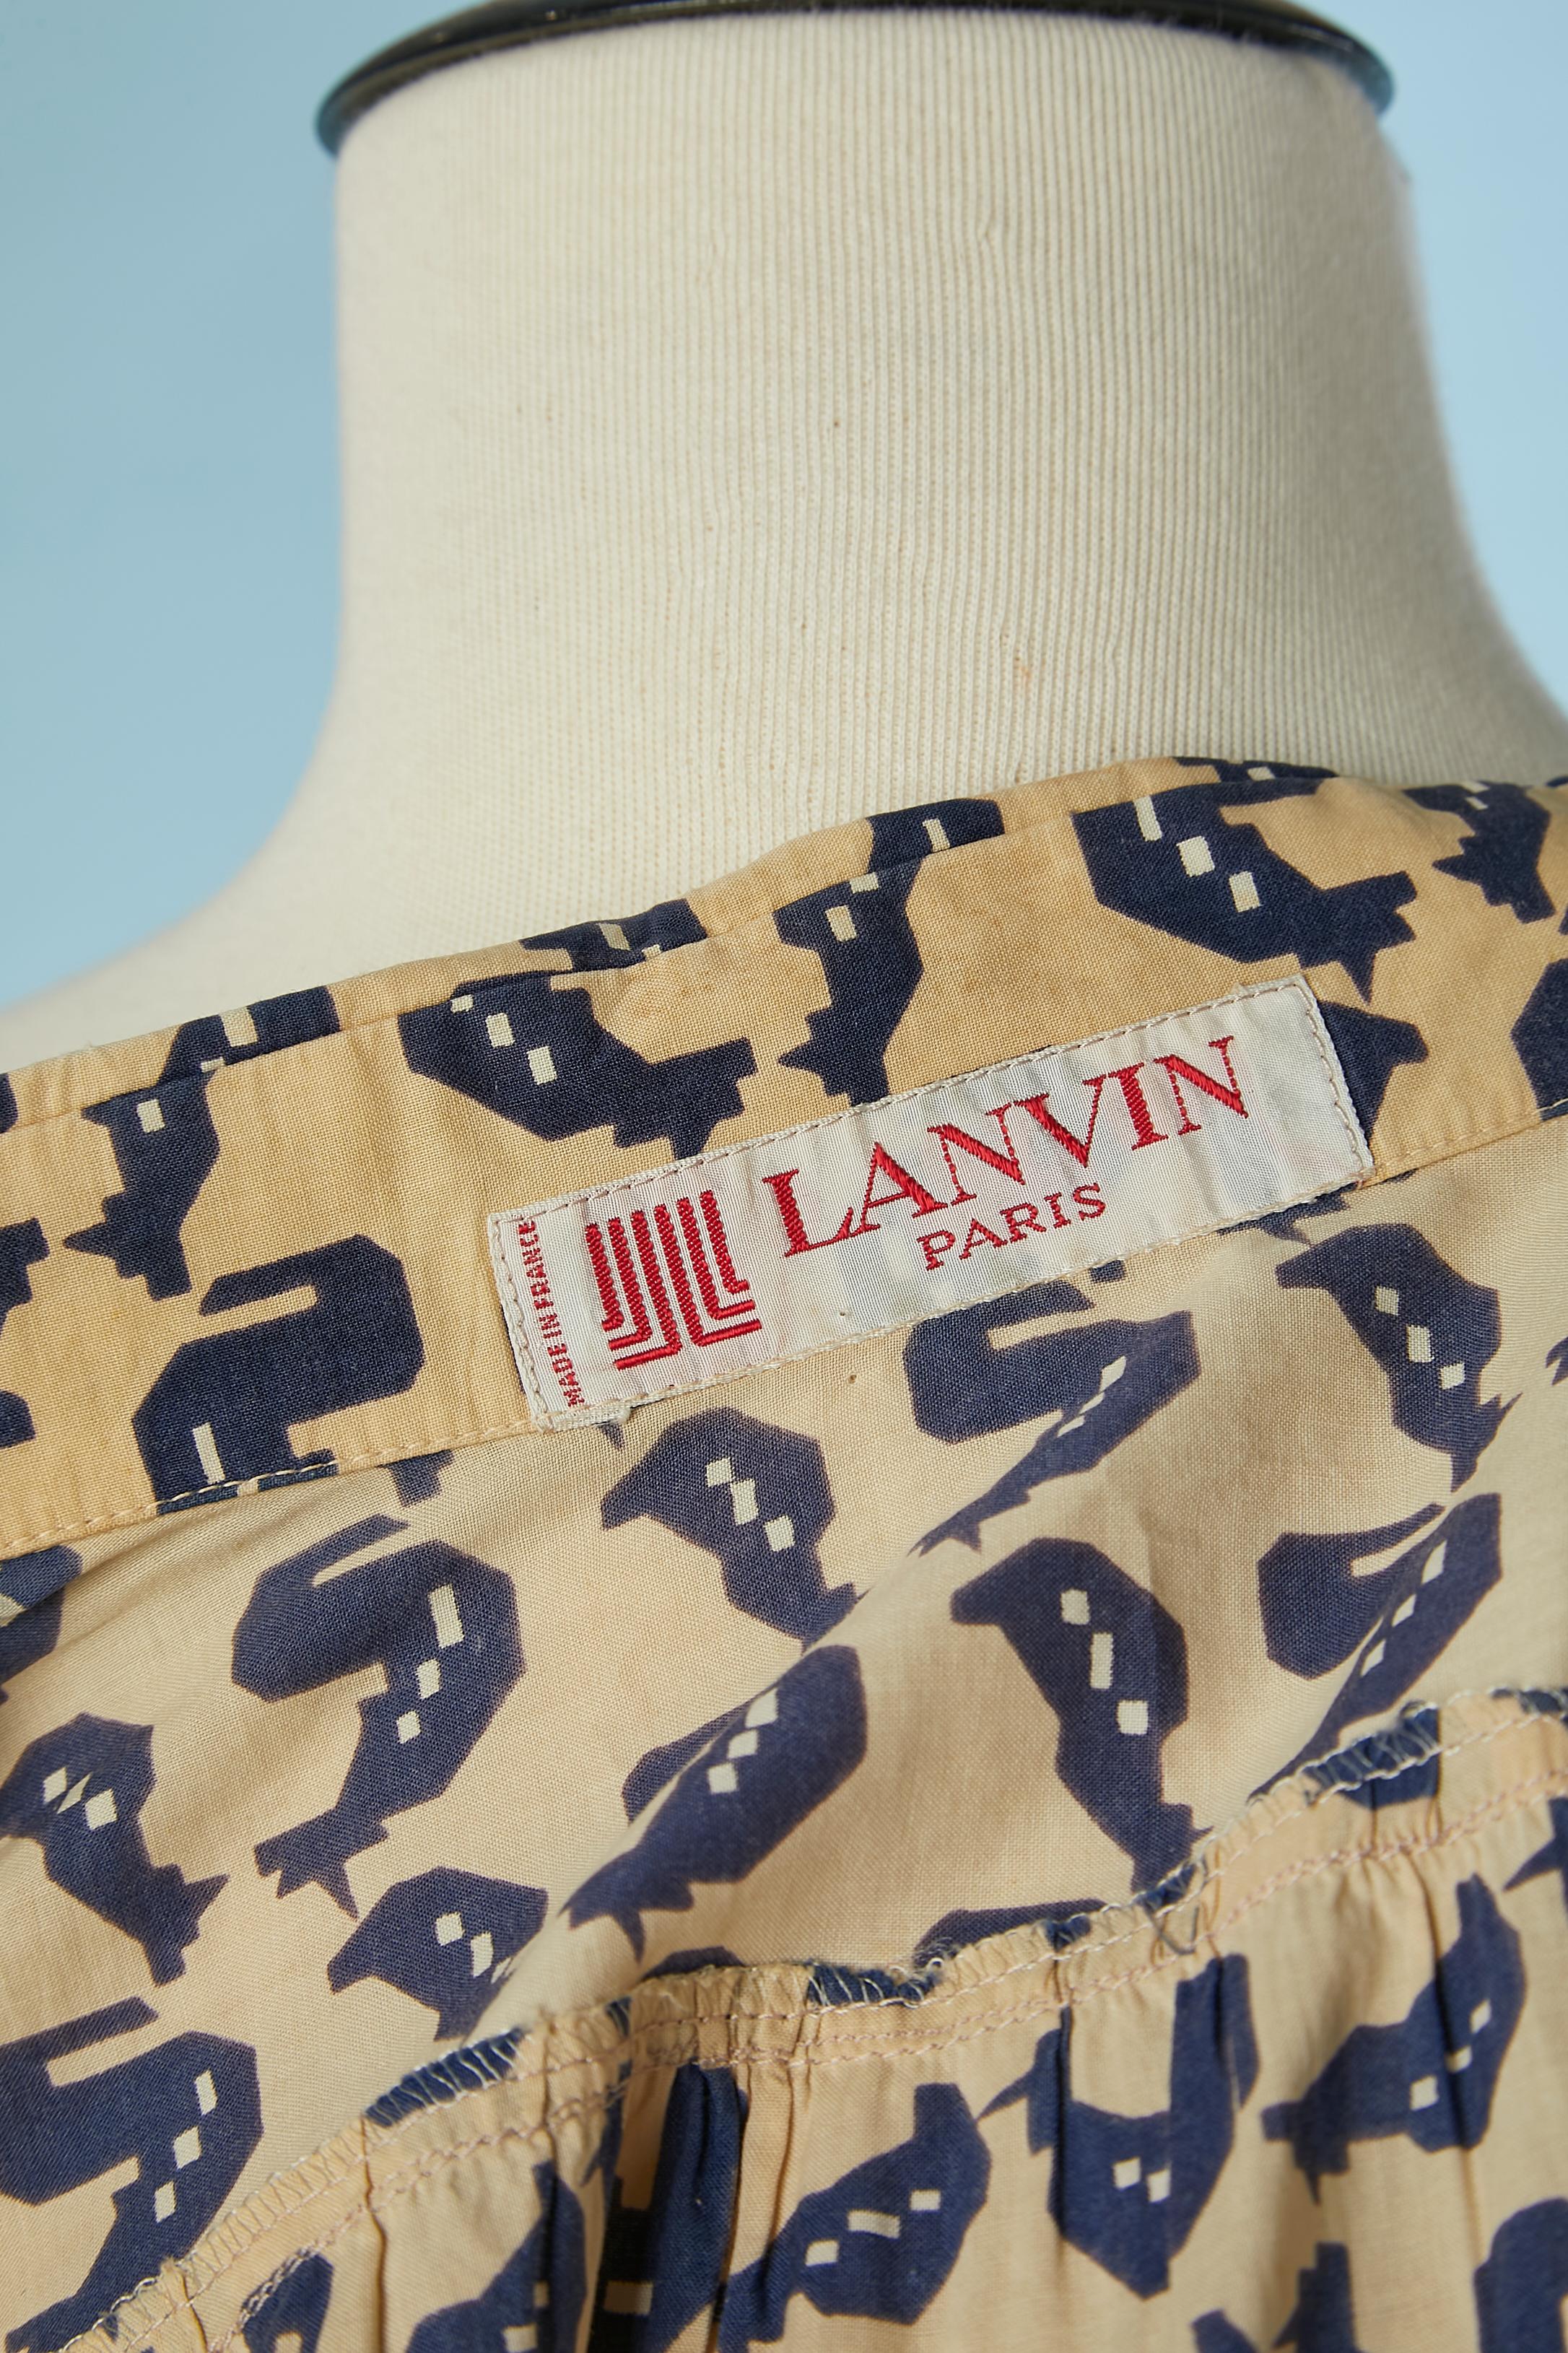 Shirt, bra and skirt ensemble in cotton with chicken print Lanvin Paris 1970's  For Sale 1